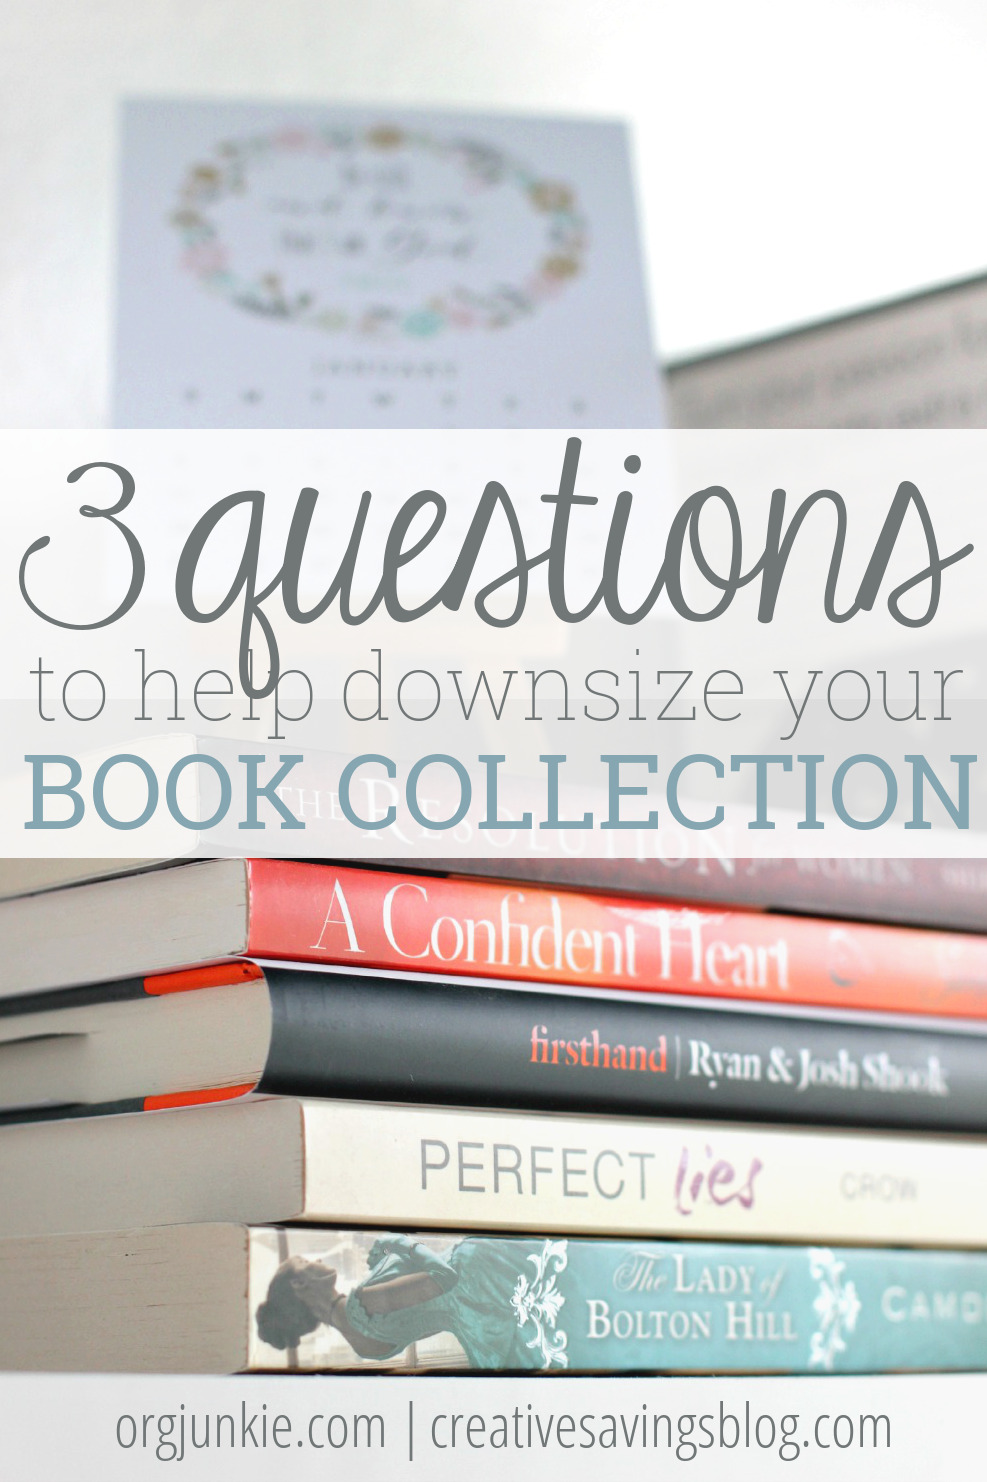 3 Questions to Help Downsize Your Book Collection